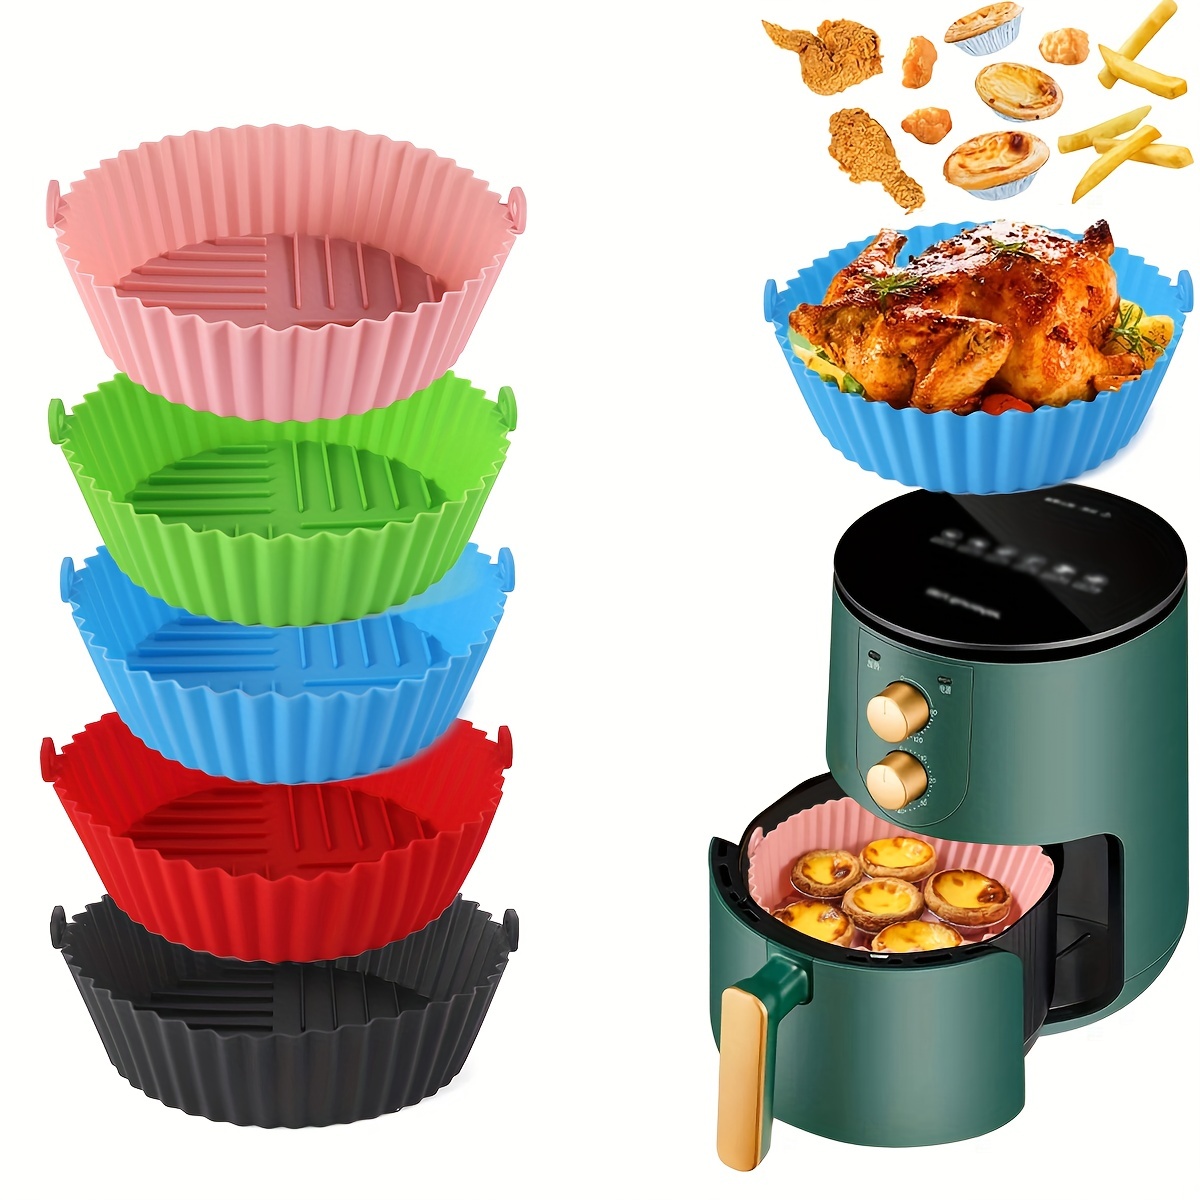 Air Fryer Silicone Liners - Silicone Airfryer Basket Liner - Air fryer  Silicone Basket - Pot Liner (Pack of 2) Reusable and Foldable pot, with 2